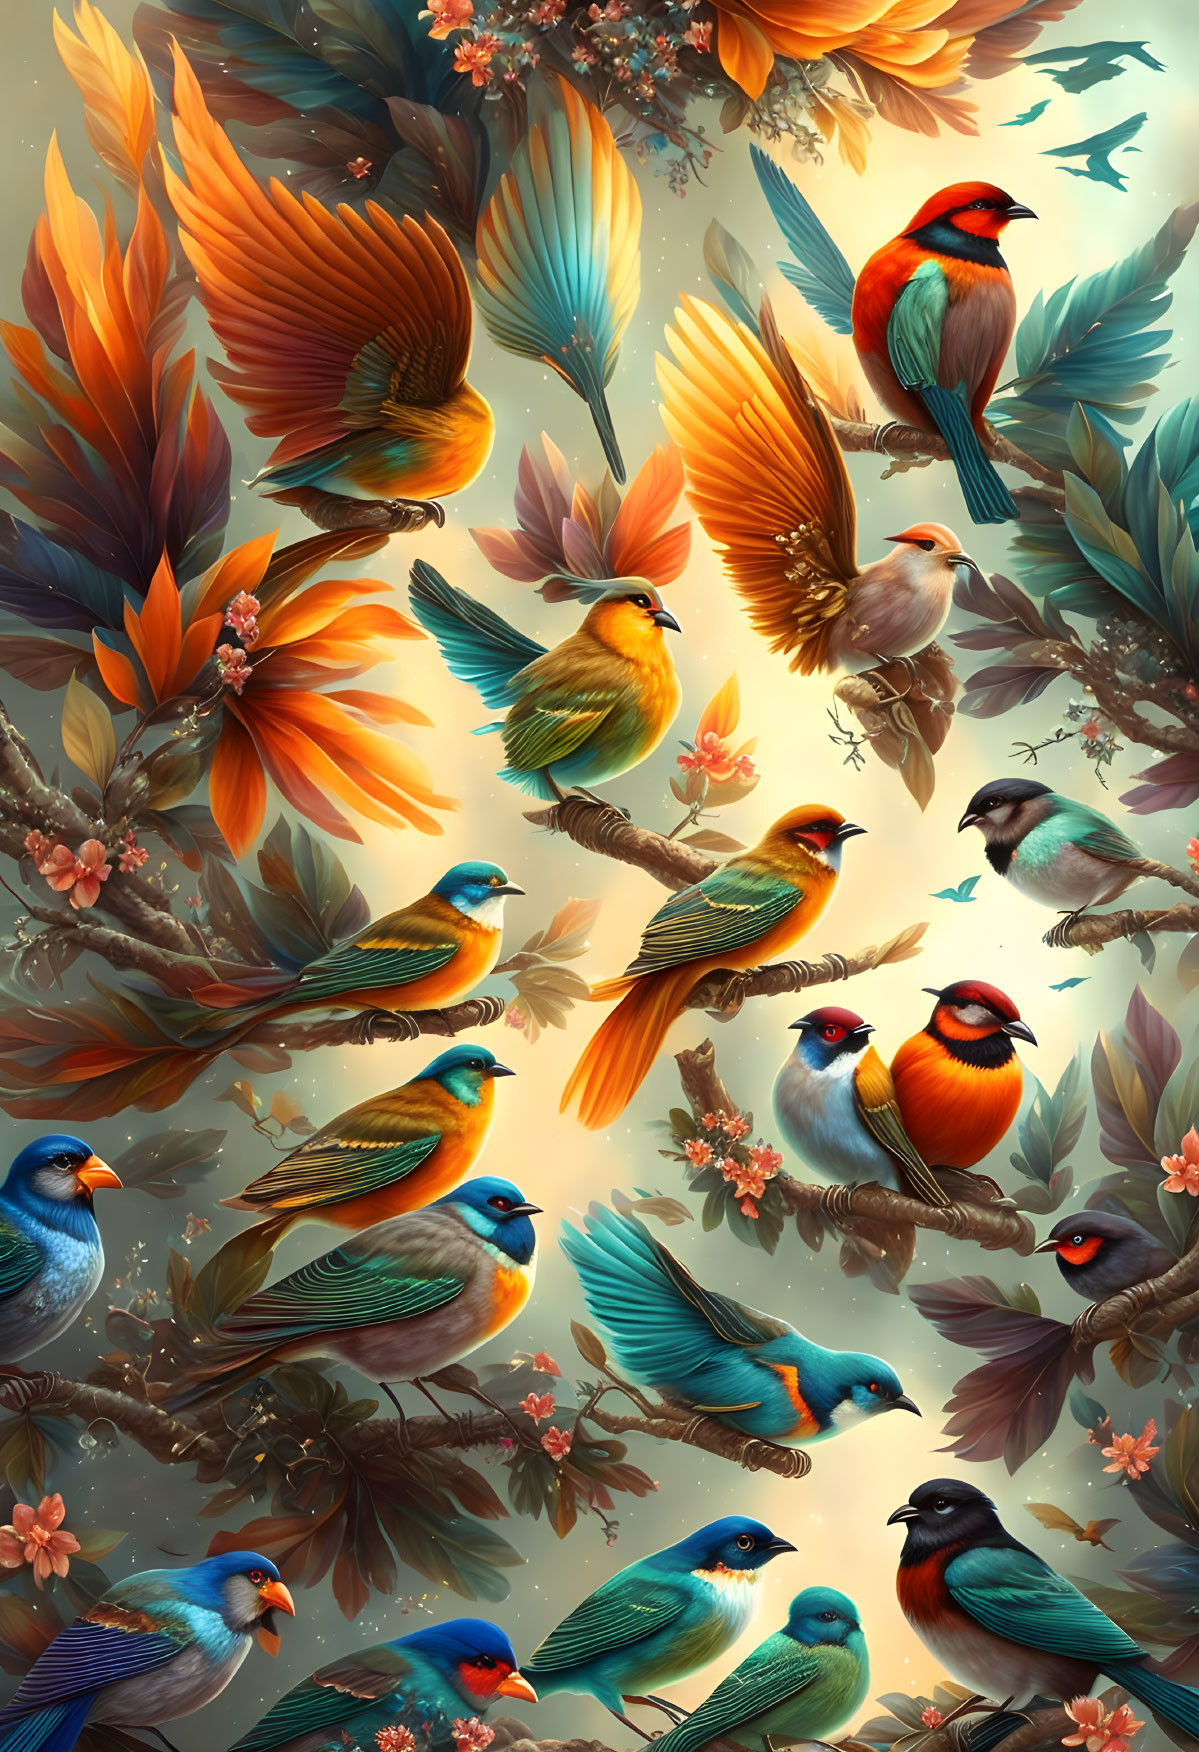 Colorful Birds Illustration: Flight and Perched on Branches in Vibrant Scene